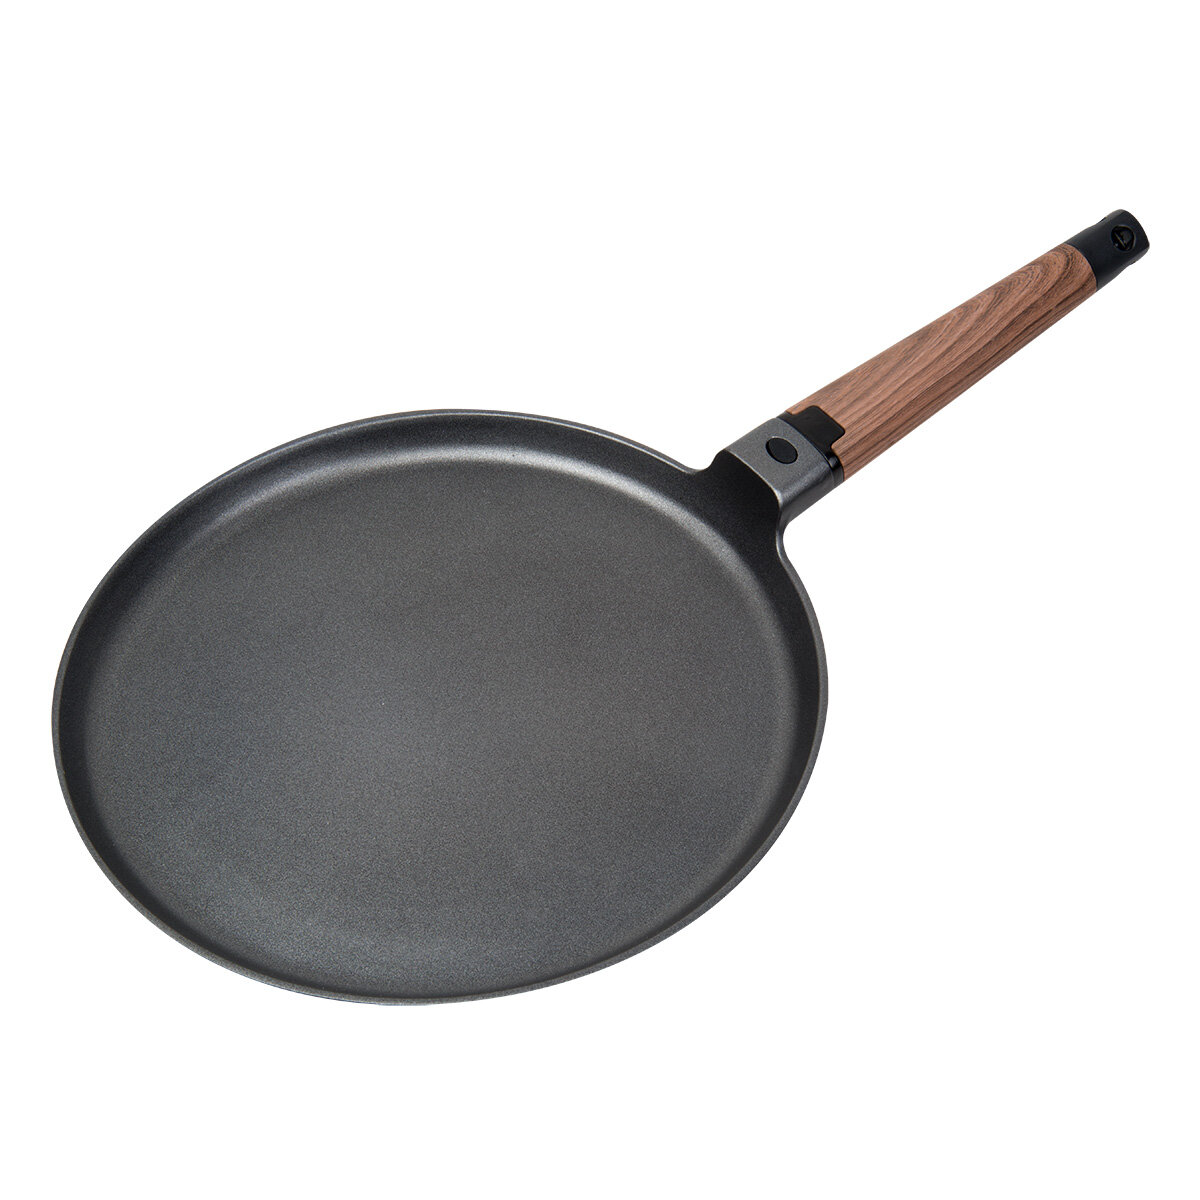 CHEFMADE Crepe Pan with Bamboo Spreader, 8-Inch Non-Stick Pancake Pan with Insulating Silicone Handle for Gas, Induction, Electric Cooker (Champagne